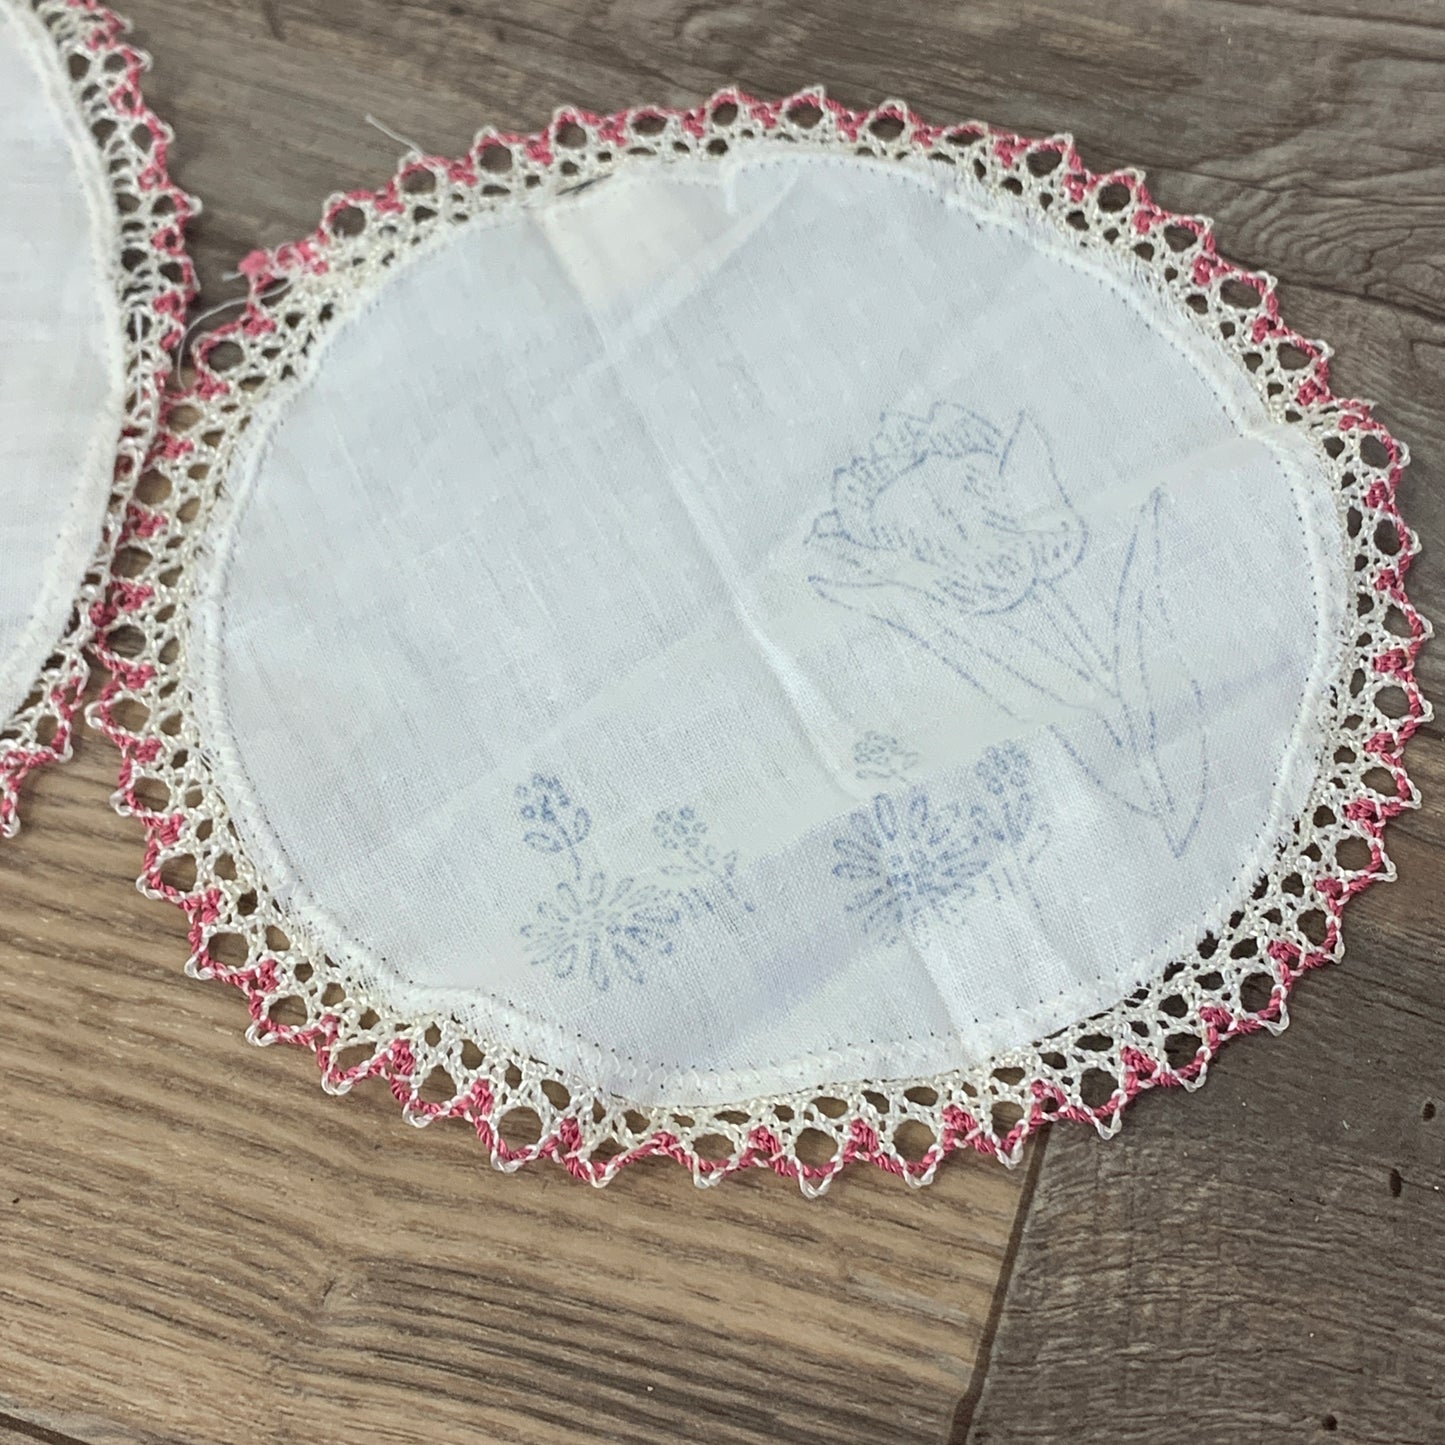 Vintage Doilies with Bobbin Lace DIY Embroidery Blanks, NOS Table Scarf with Iron on Transfers